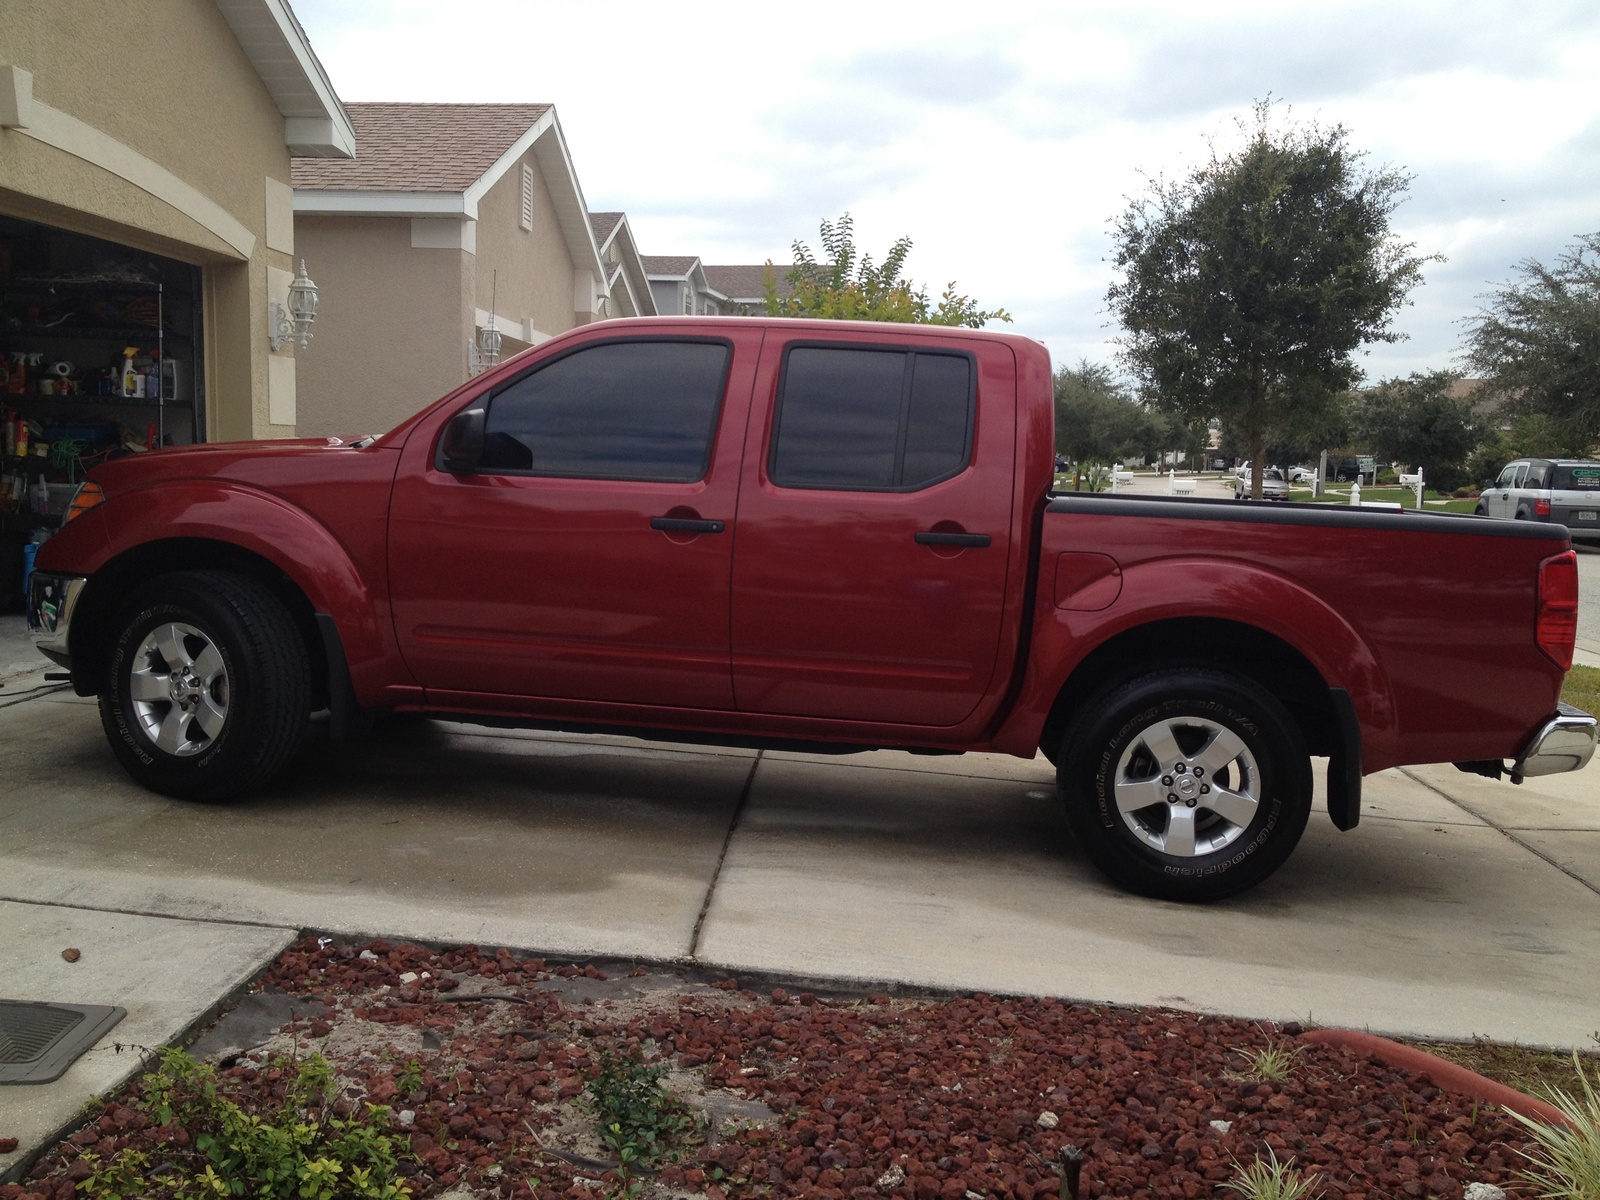 2010 Nissan frontier crew cab user reviews #5